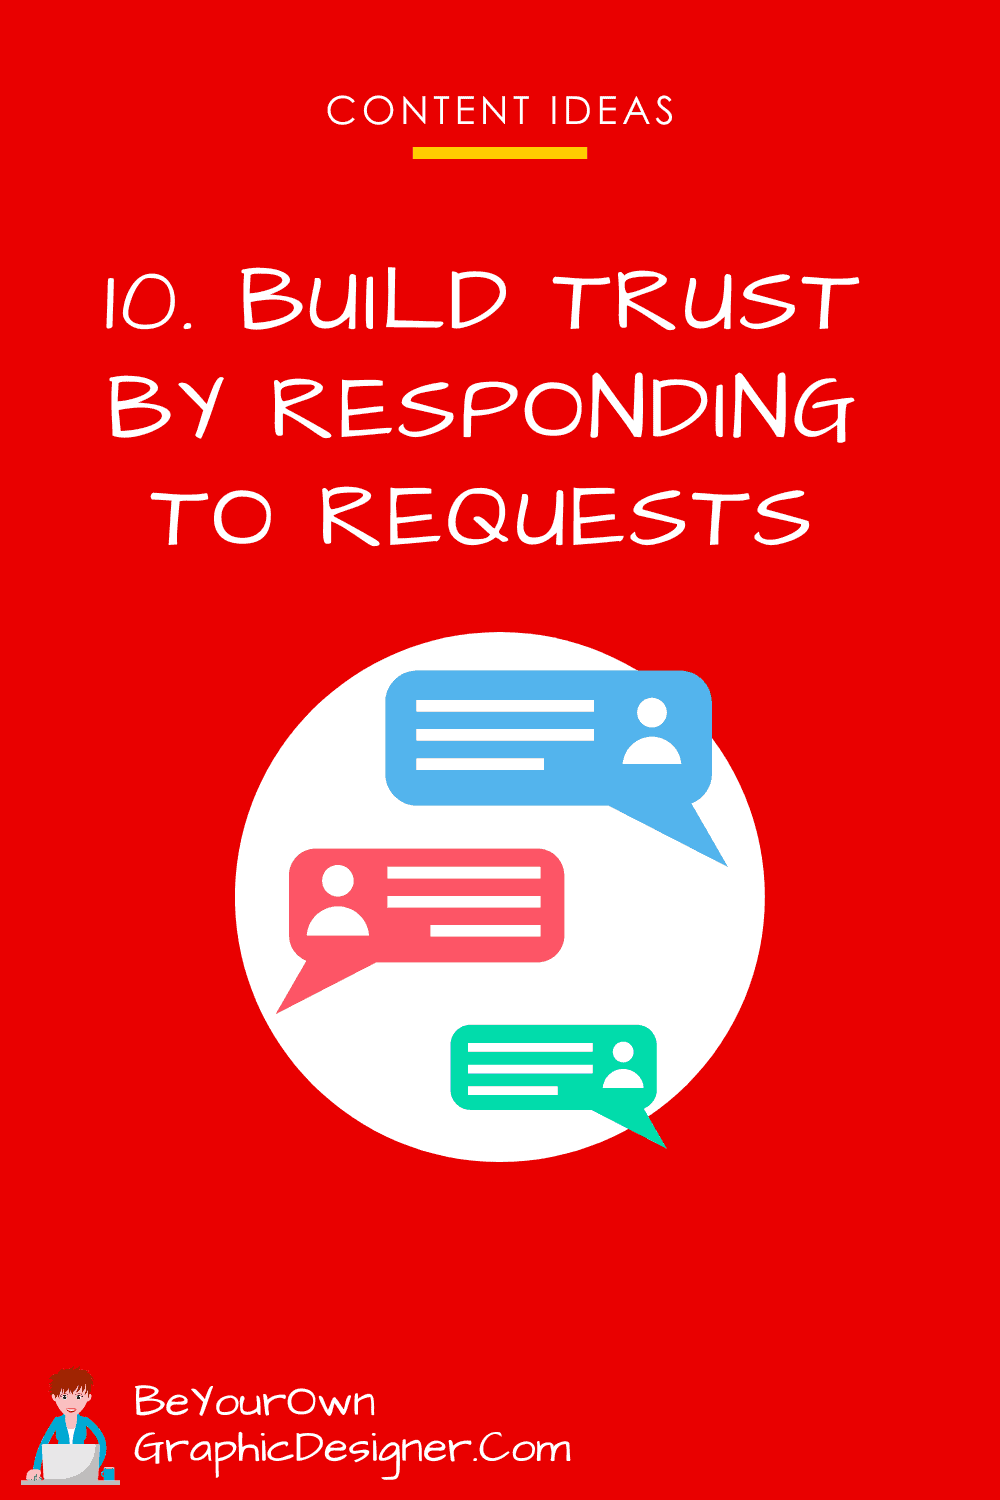 December Content Ideas- Build trust by responding to requests